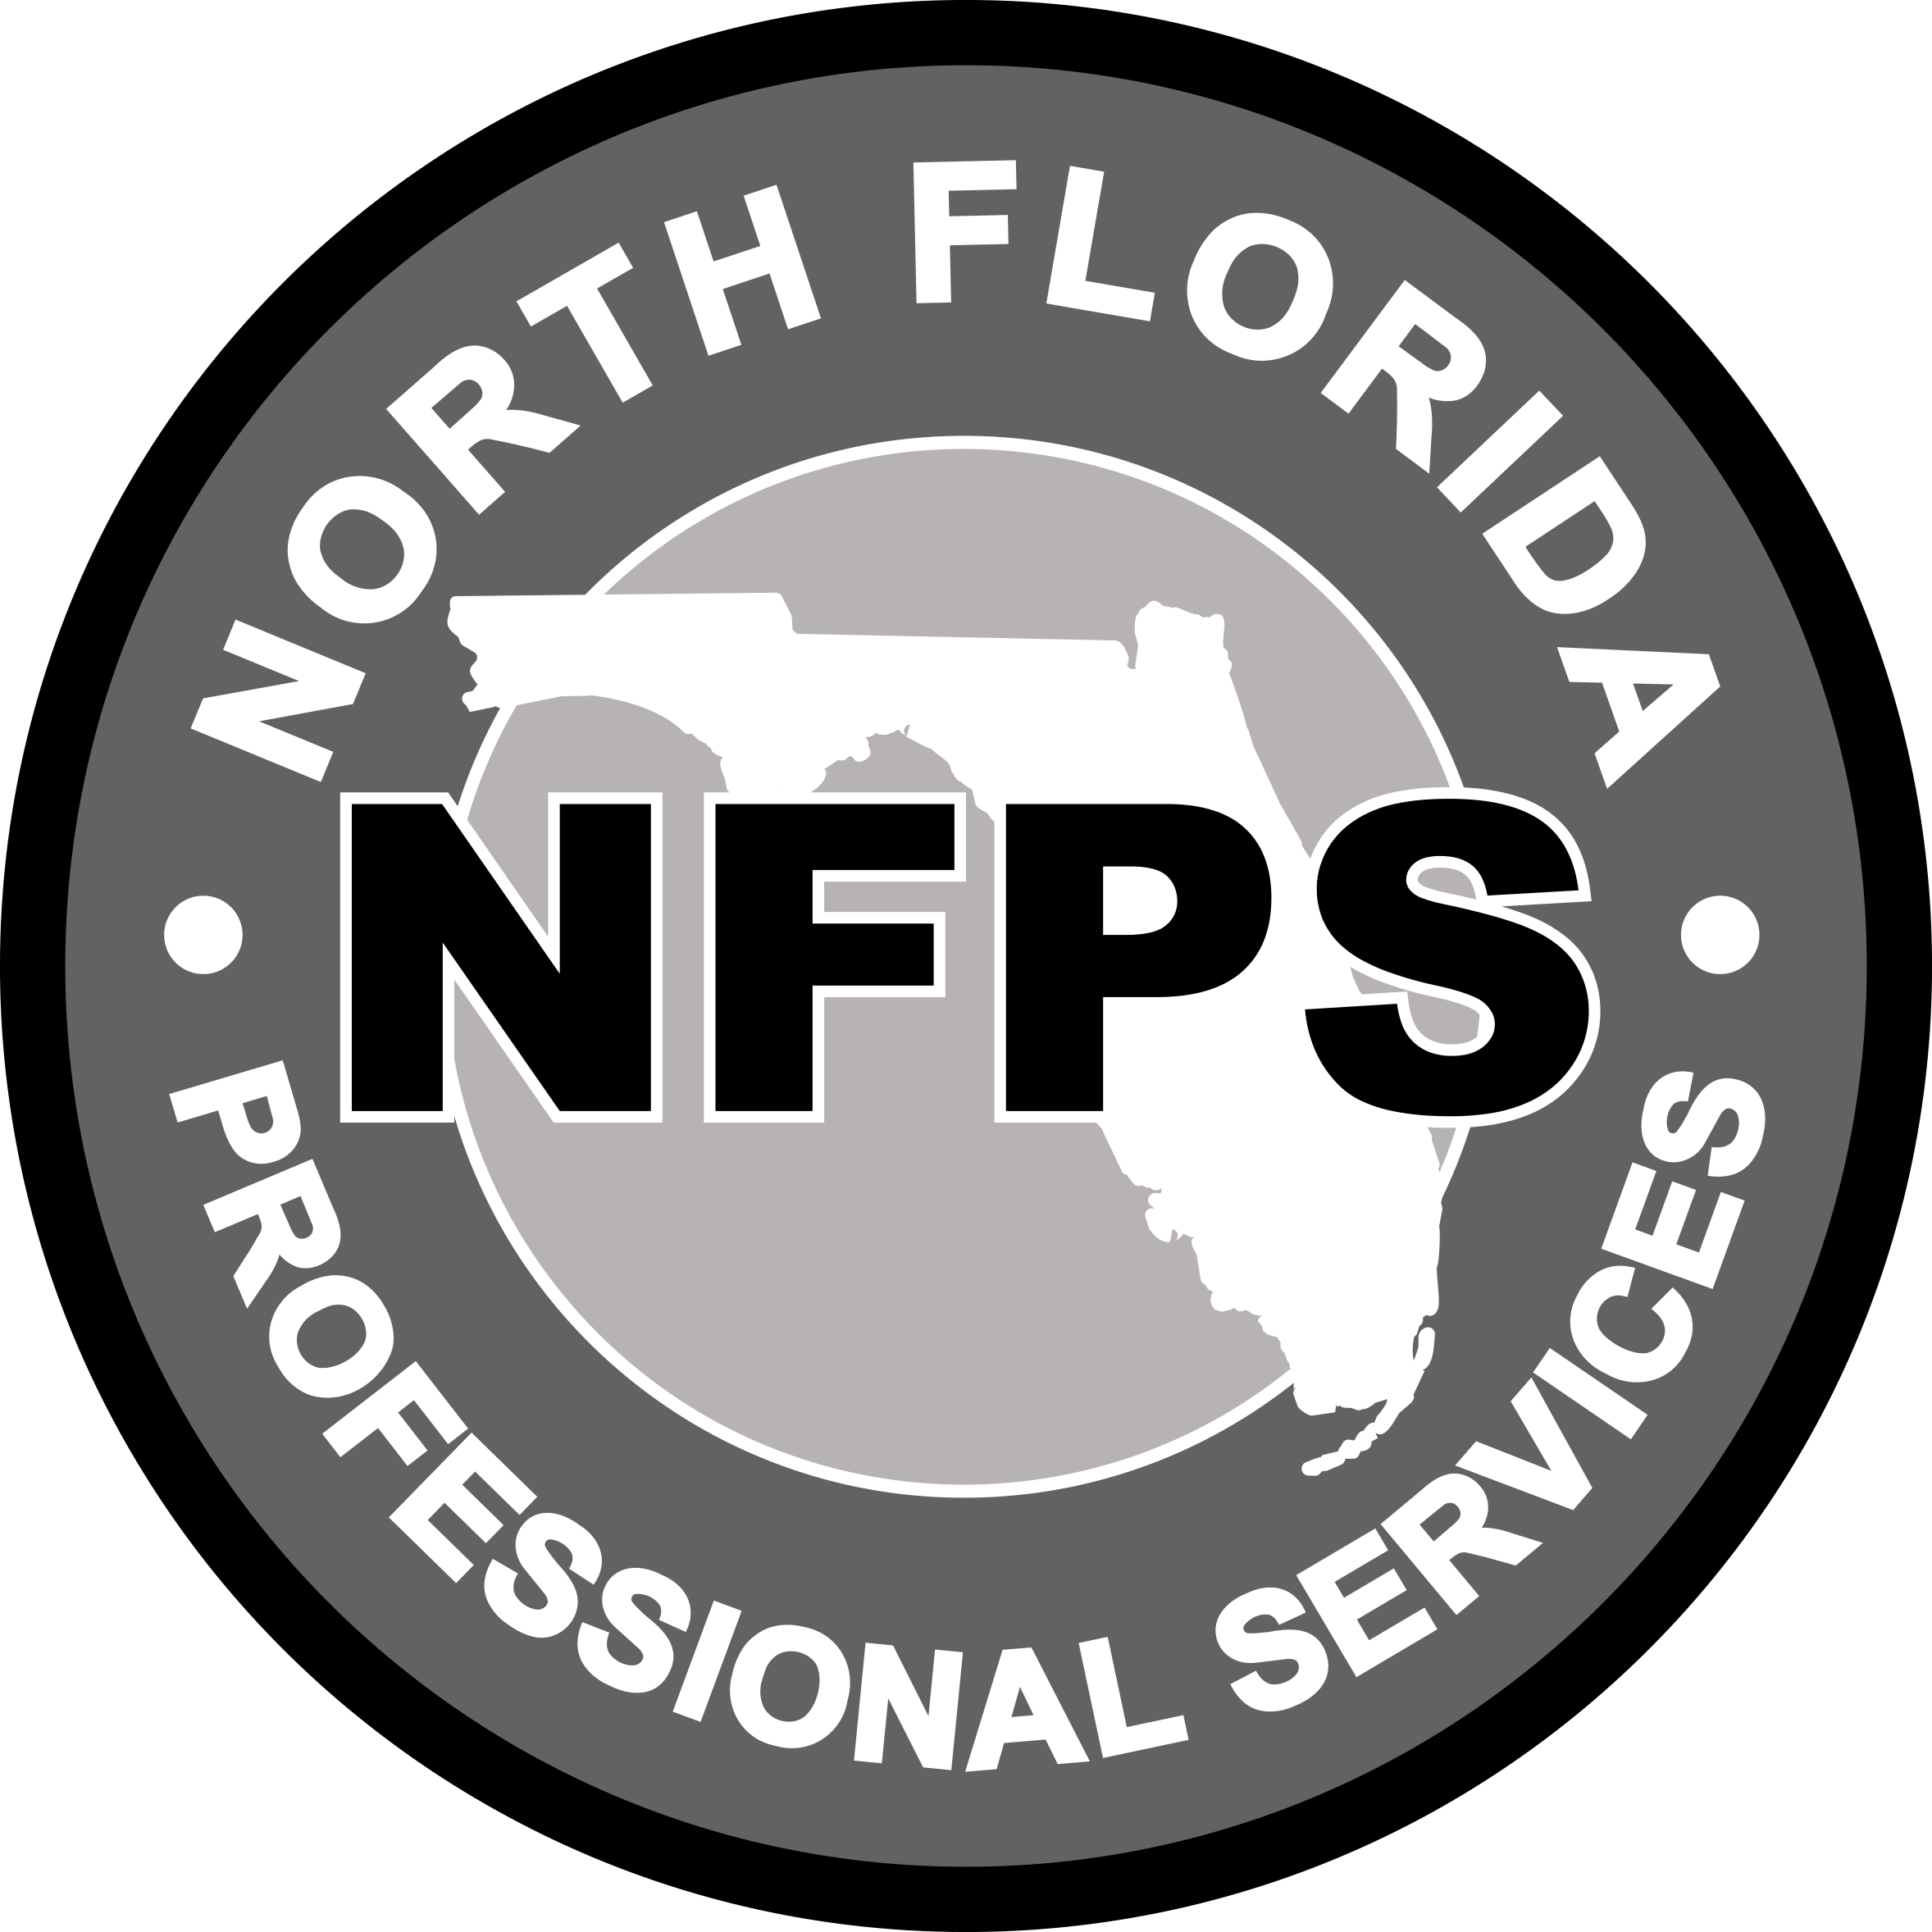 NFPS